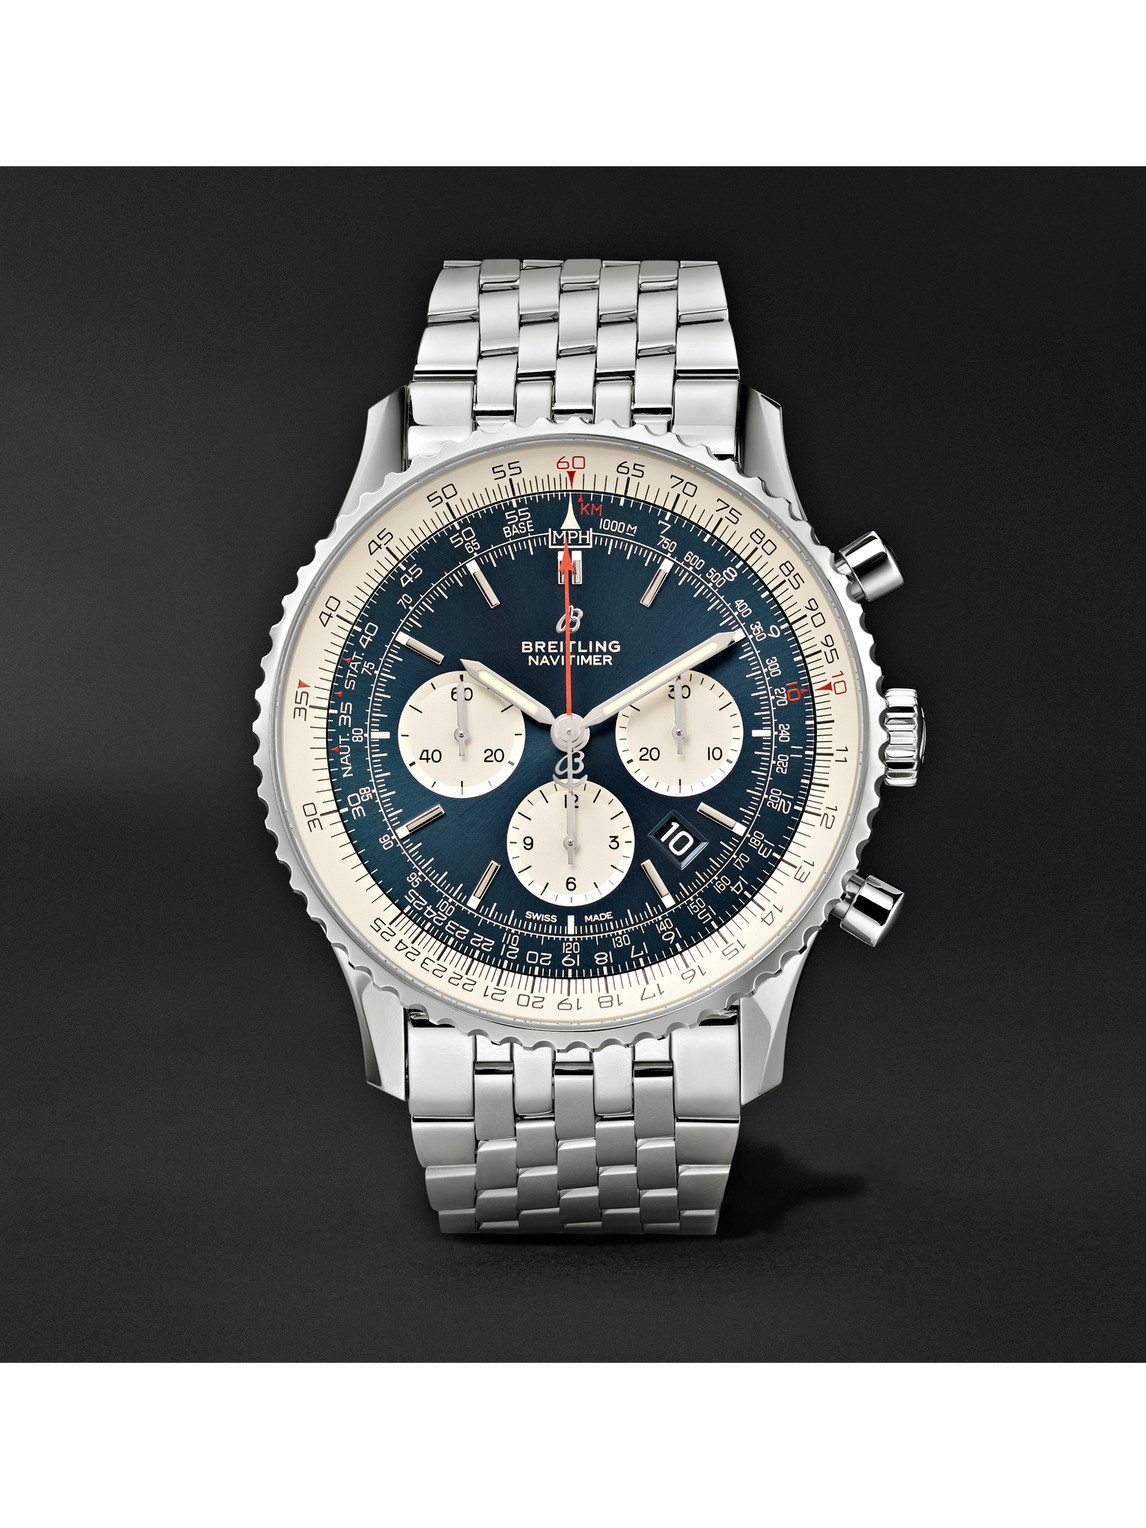 Breitling Navitimer B01 Automatic Chronograph 46mm Stainless Steel Watch, Ref. No. Ab0127211c1a1 In Blue